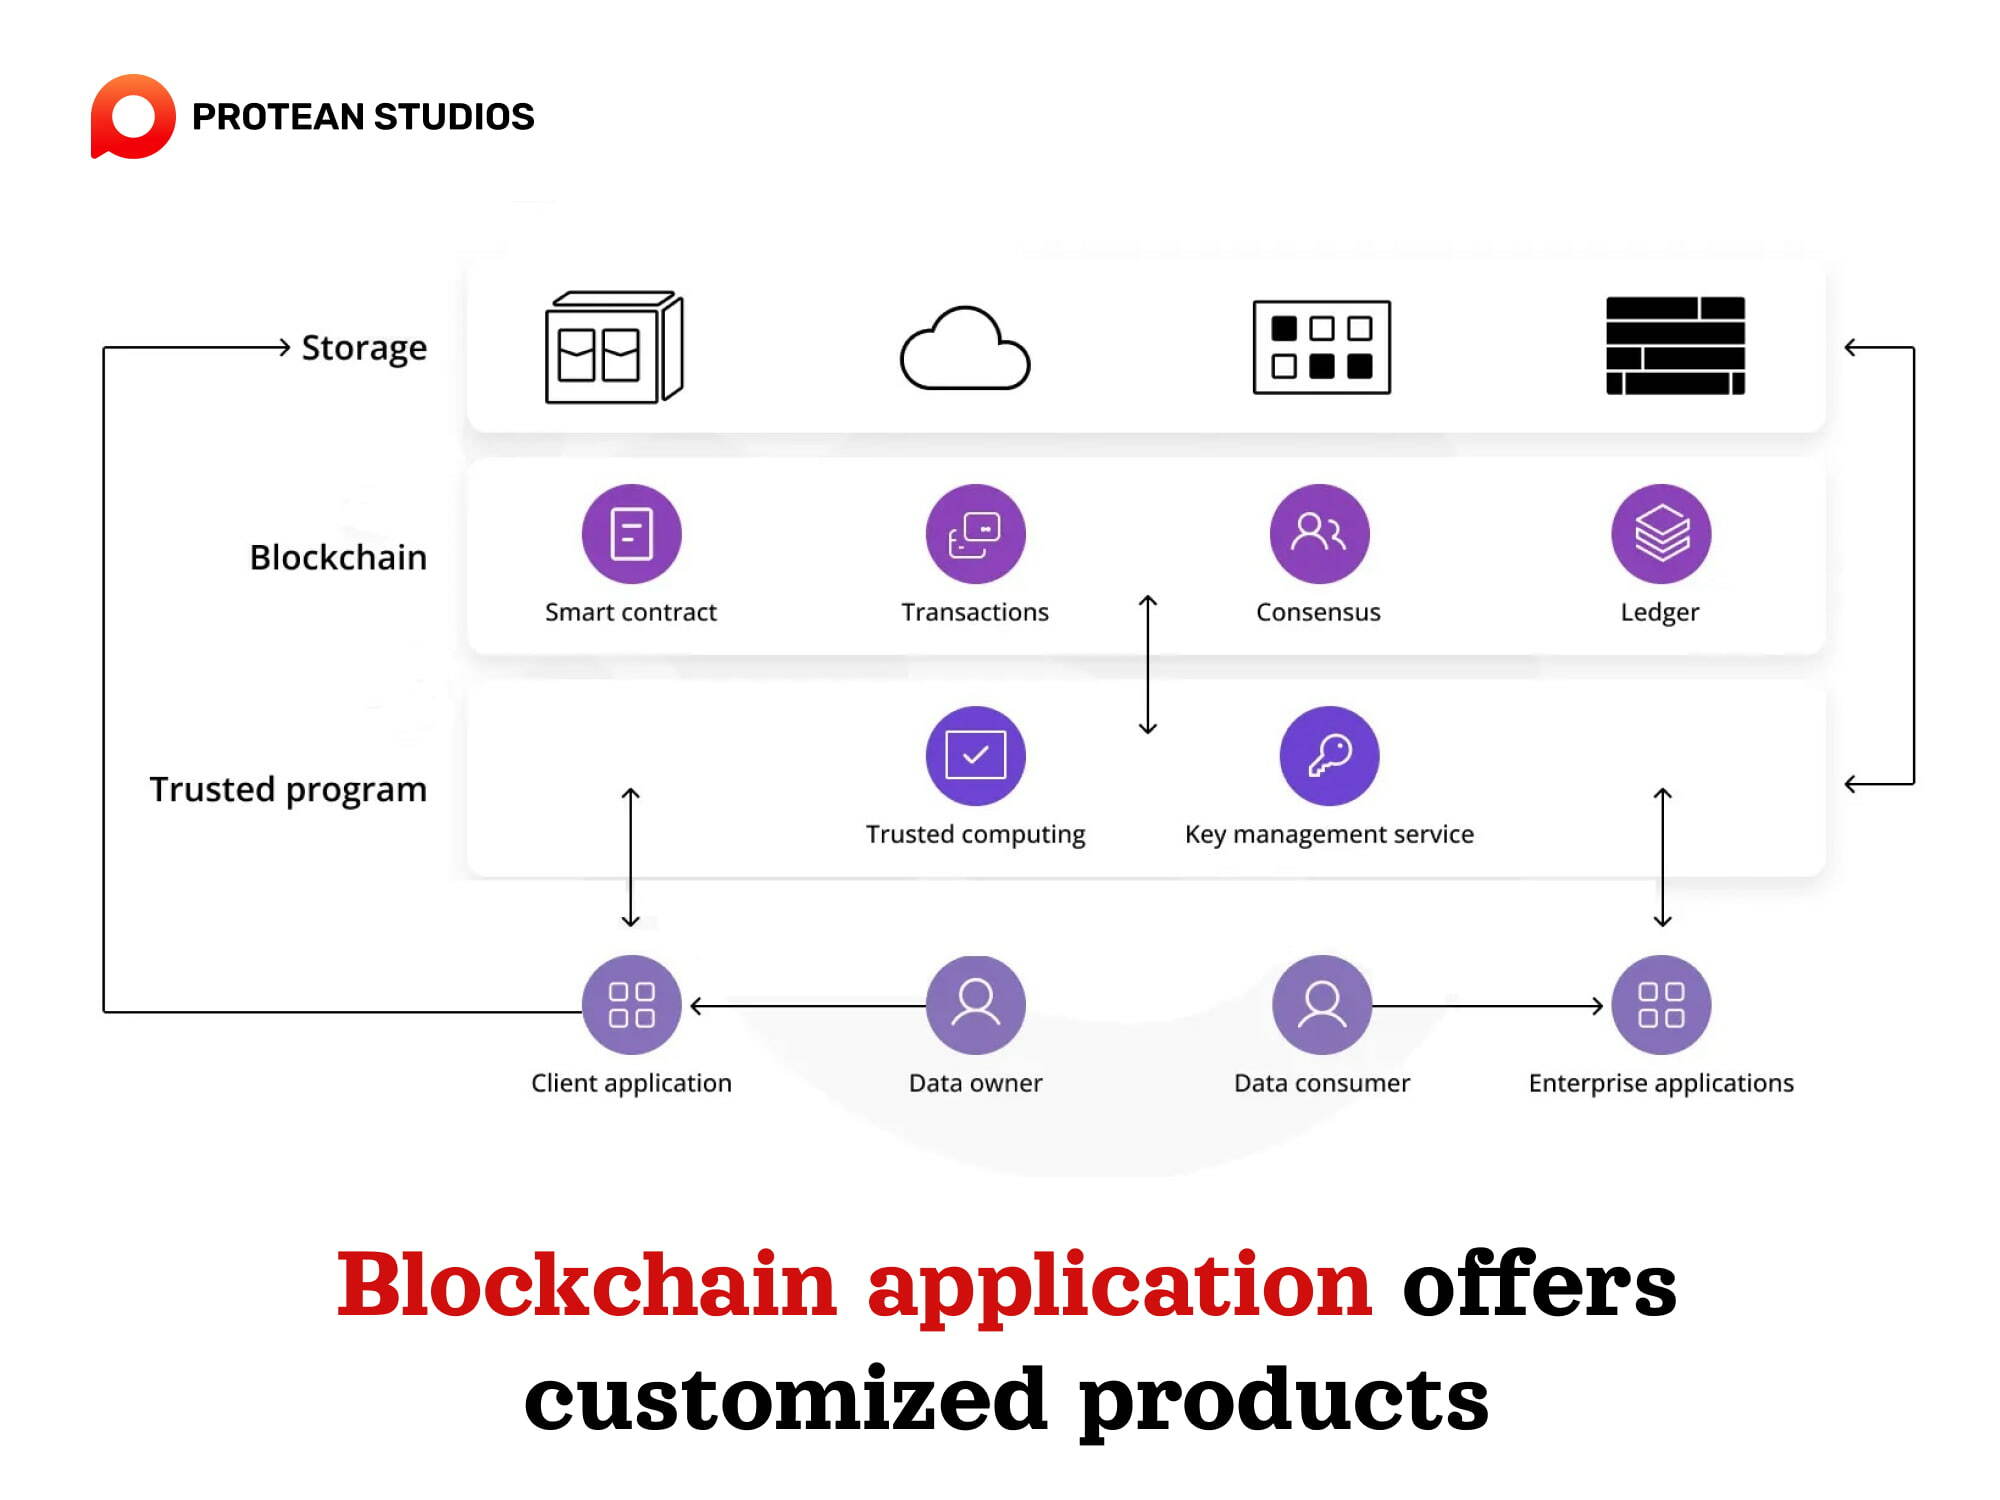 Blockchain technology offers customized products